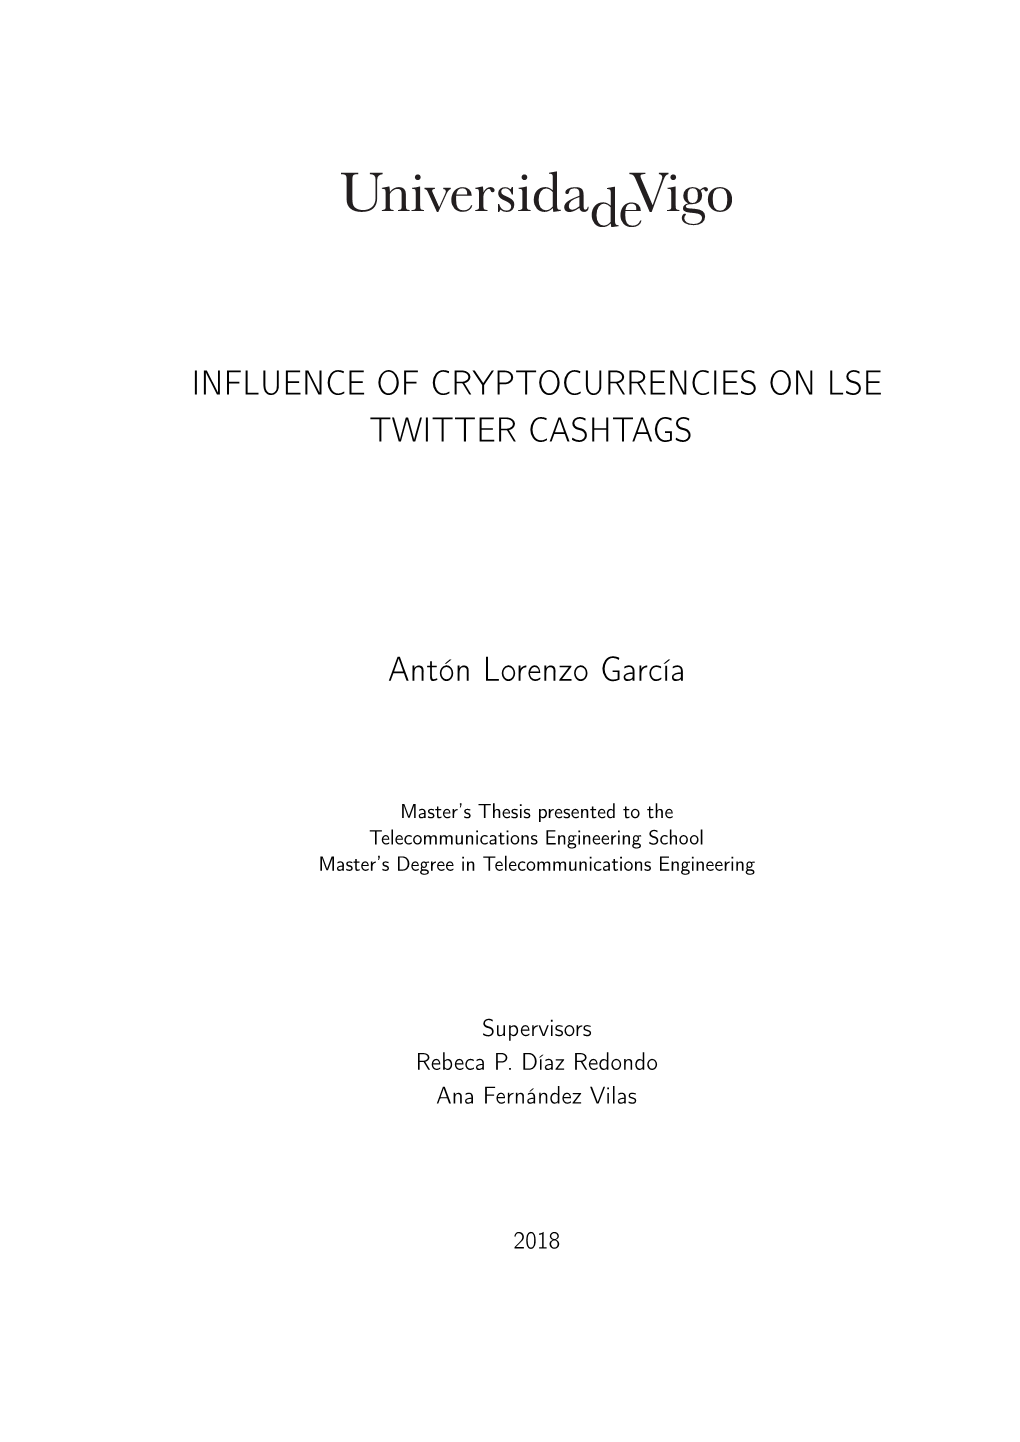 Influence of Cryptocurrencies on Lse Twitter Cashtags